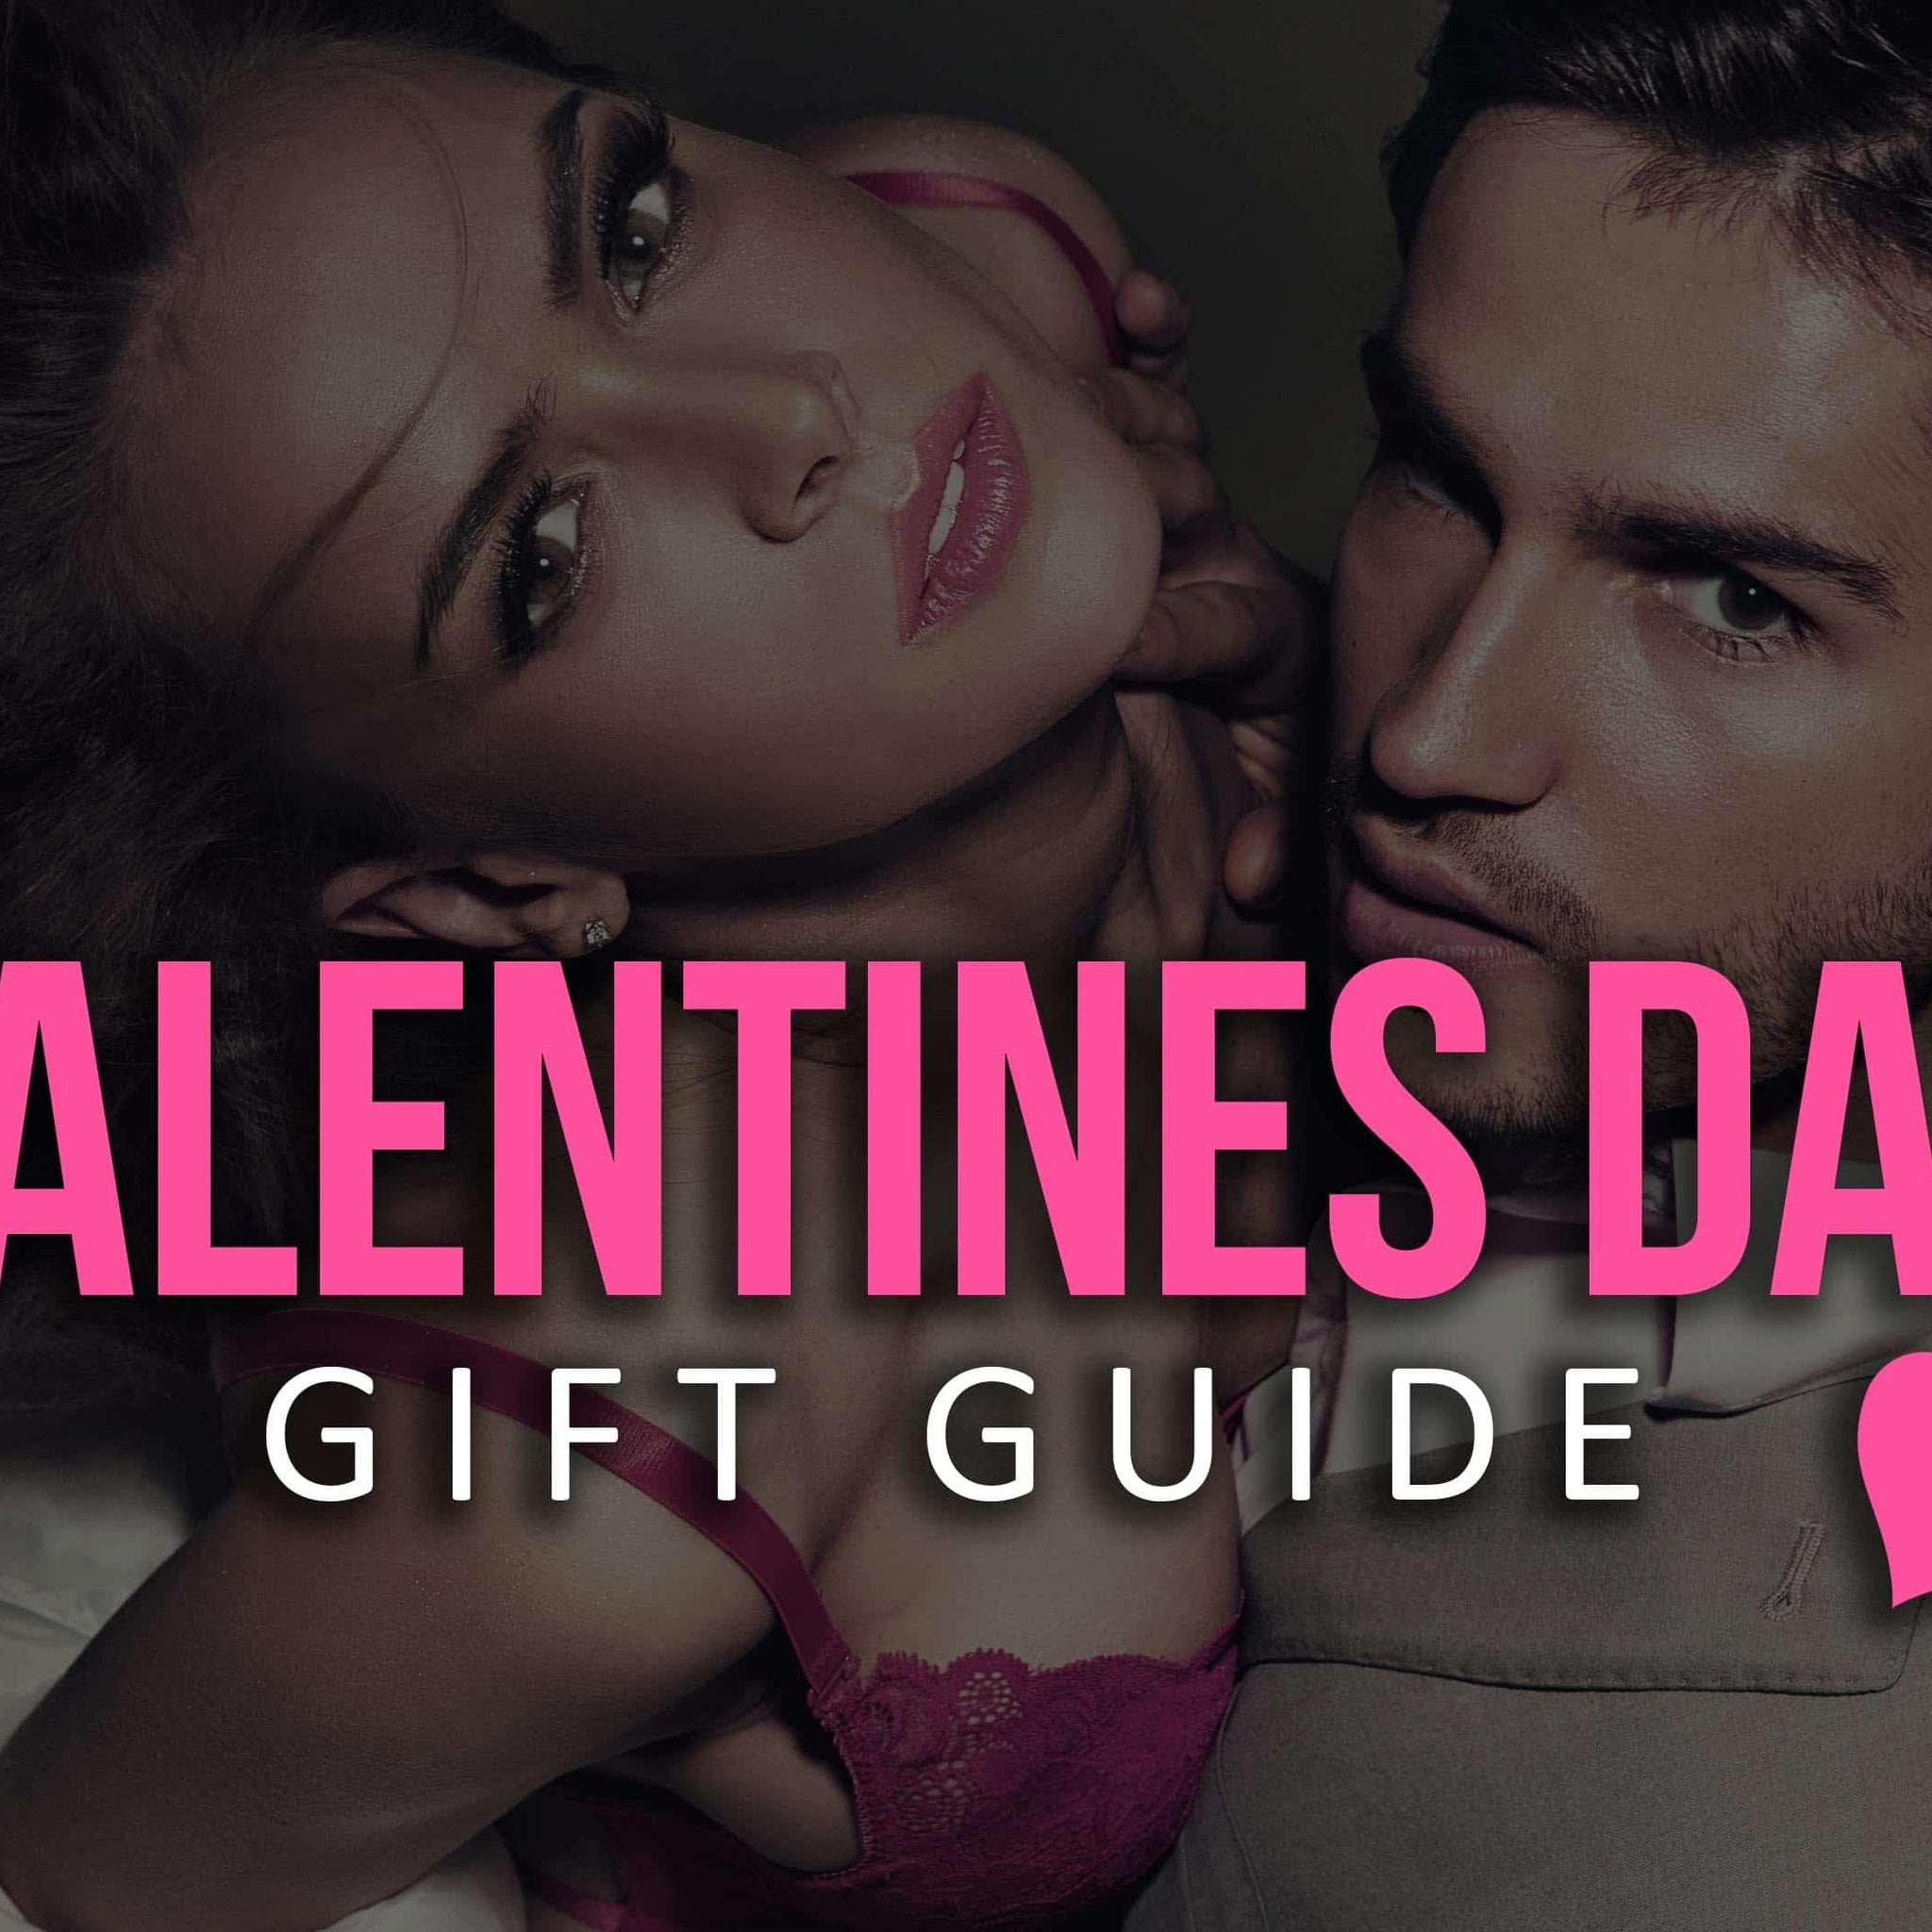 Valentines Day Gift Guide - https://www.mysexshop.co.za/